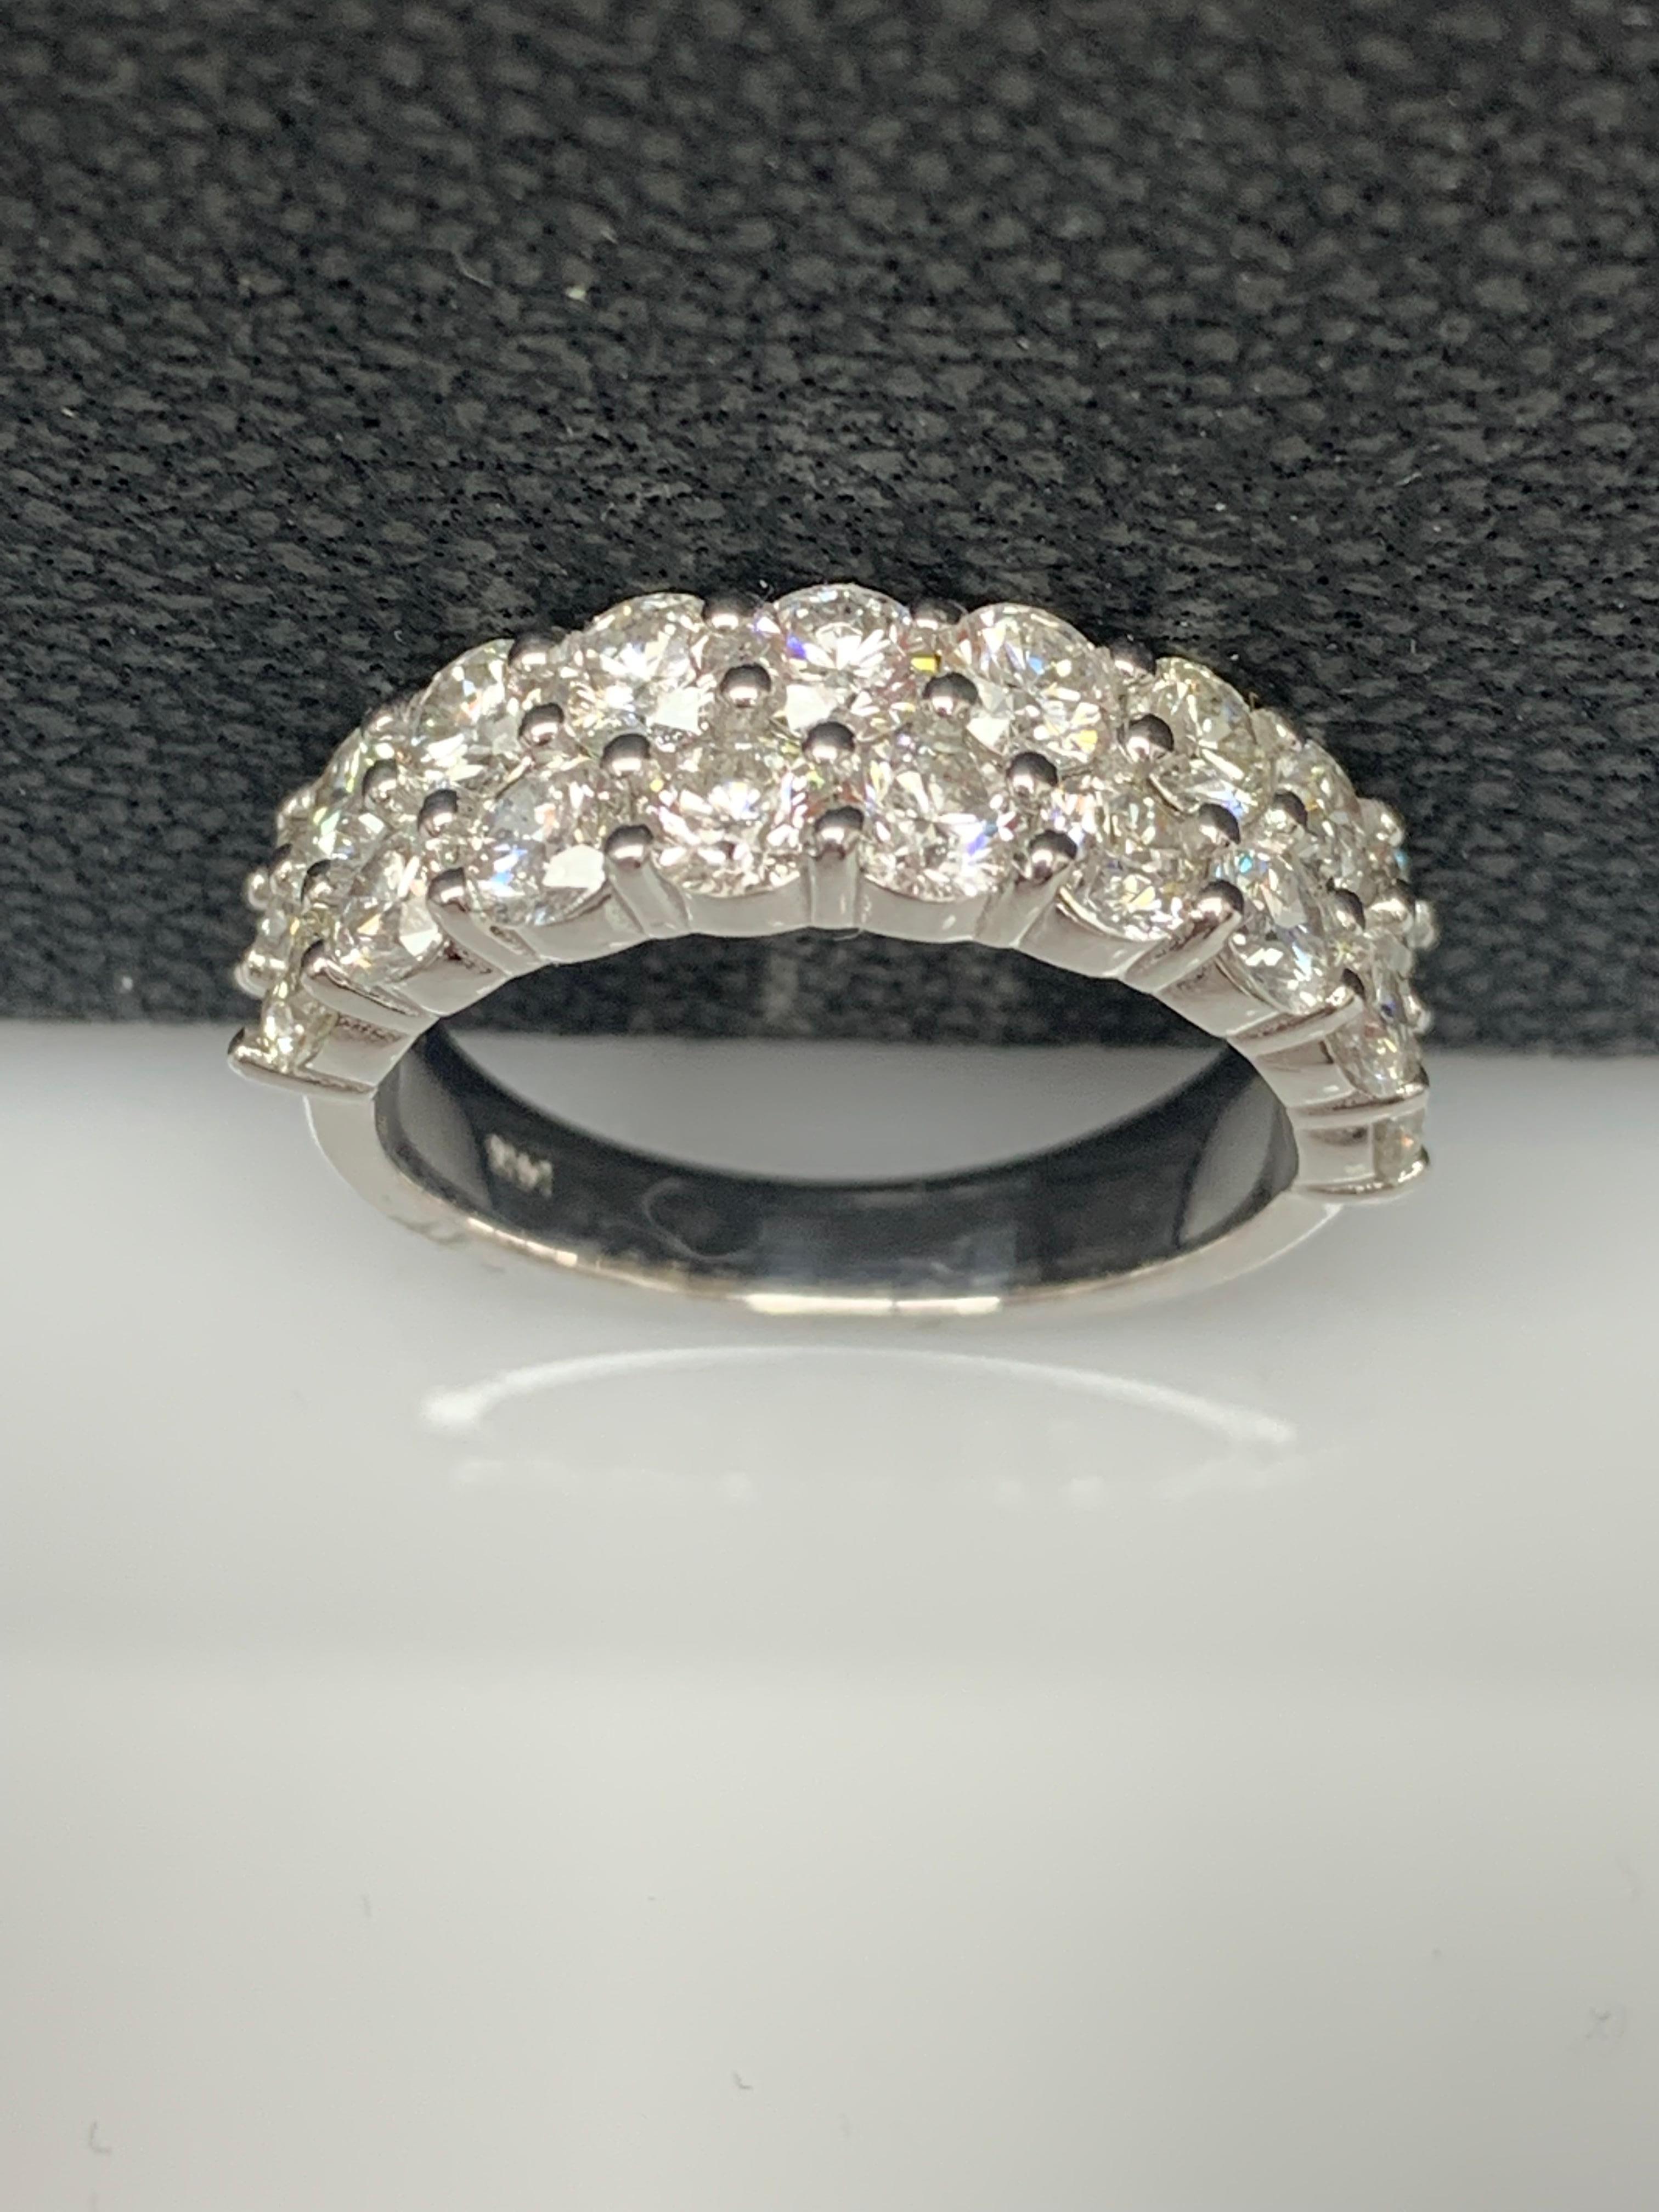 A unique and fashionable ZicZac ring showcasing two rows of 19 brilliant cut diamonds, set in a band design. Diamonds weigh 2.83 carats total. A brilliant and masterfully-made piece.

Style available in different price ranges. Prices are based on